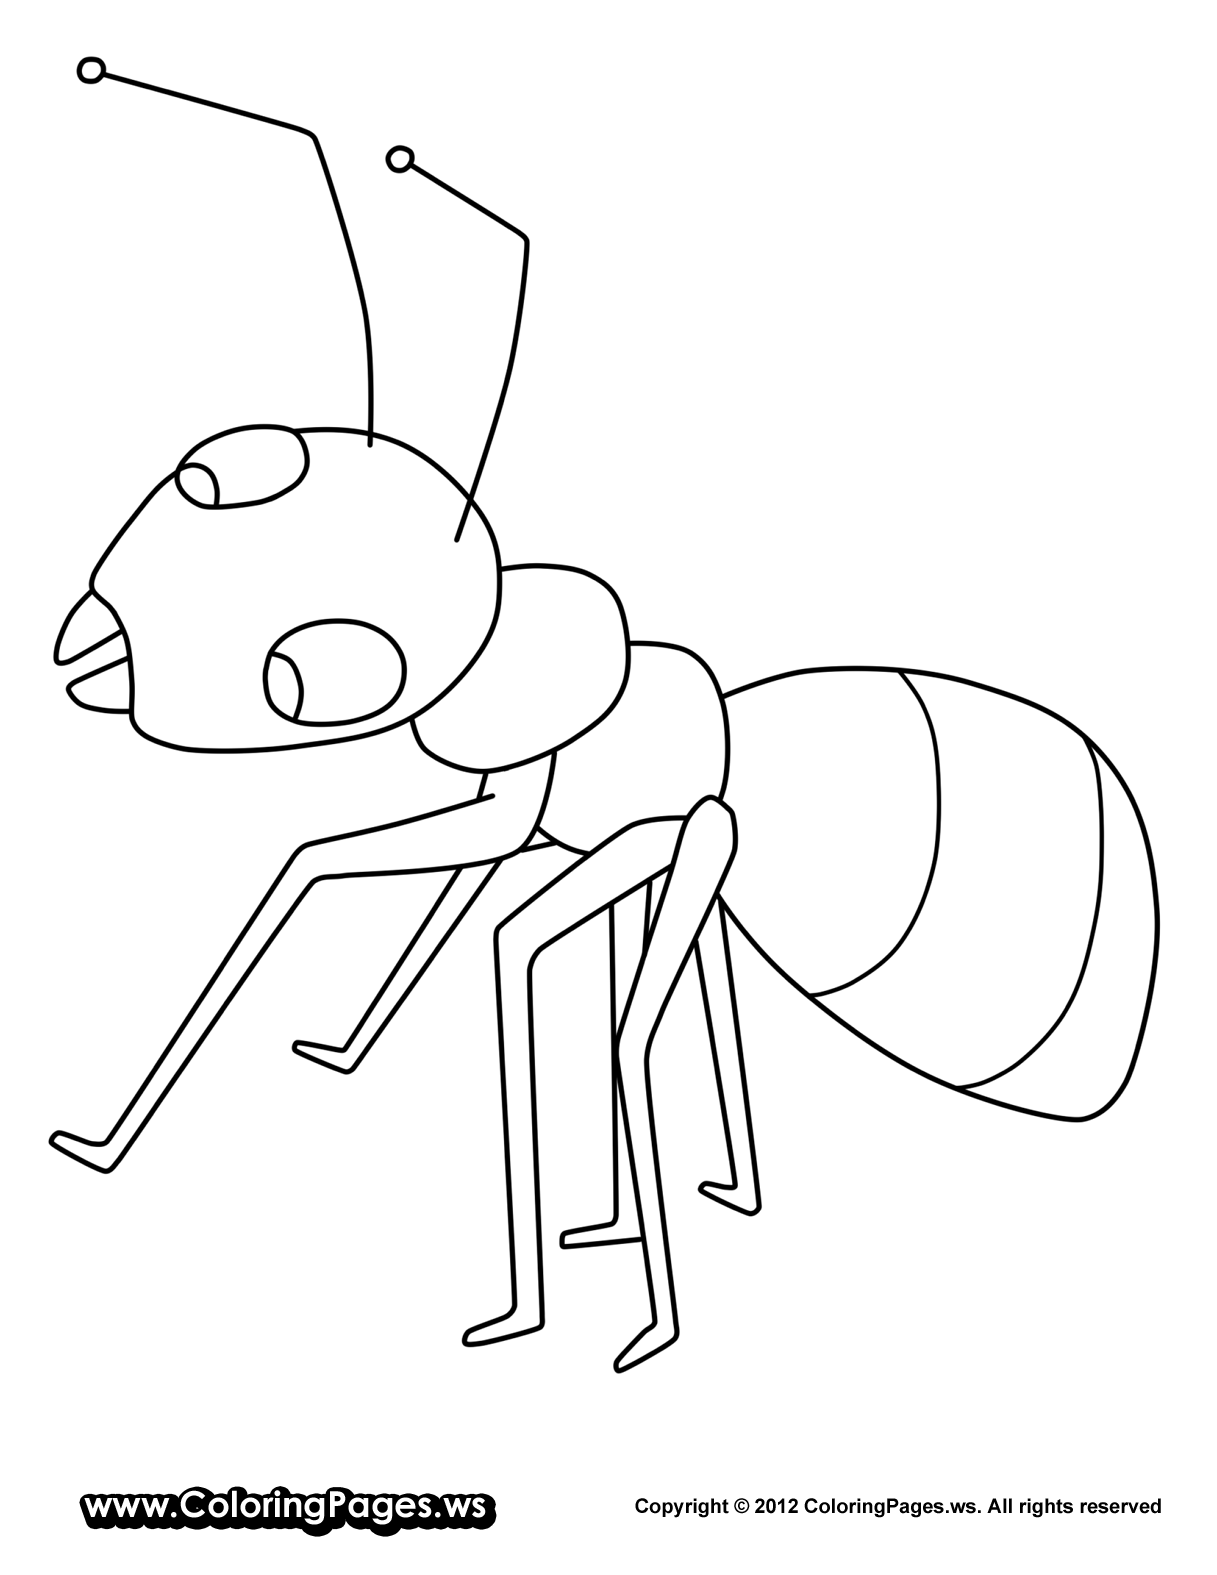 ant-man-mask-coloring-page-coloring-pages